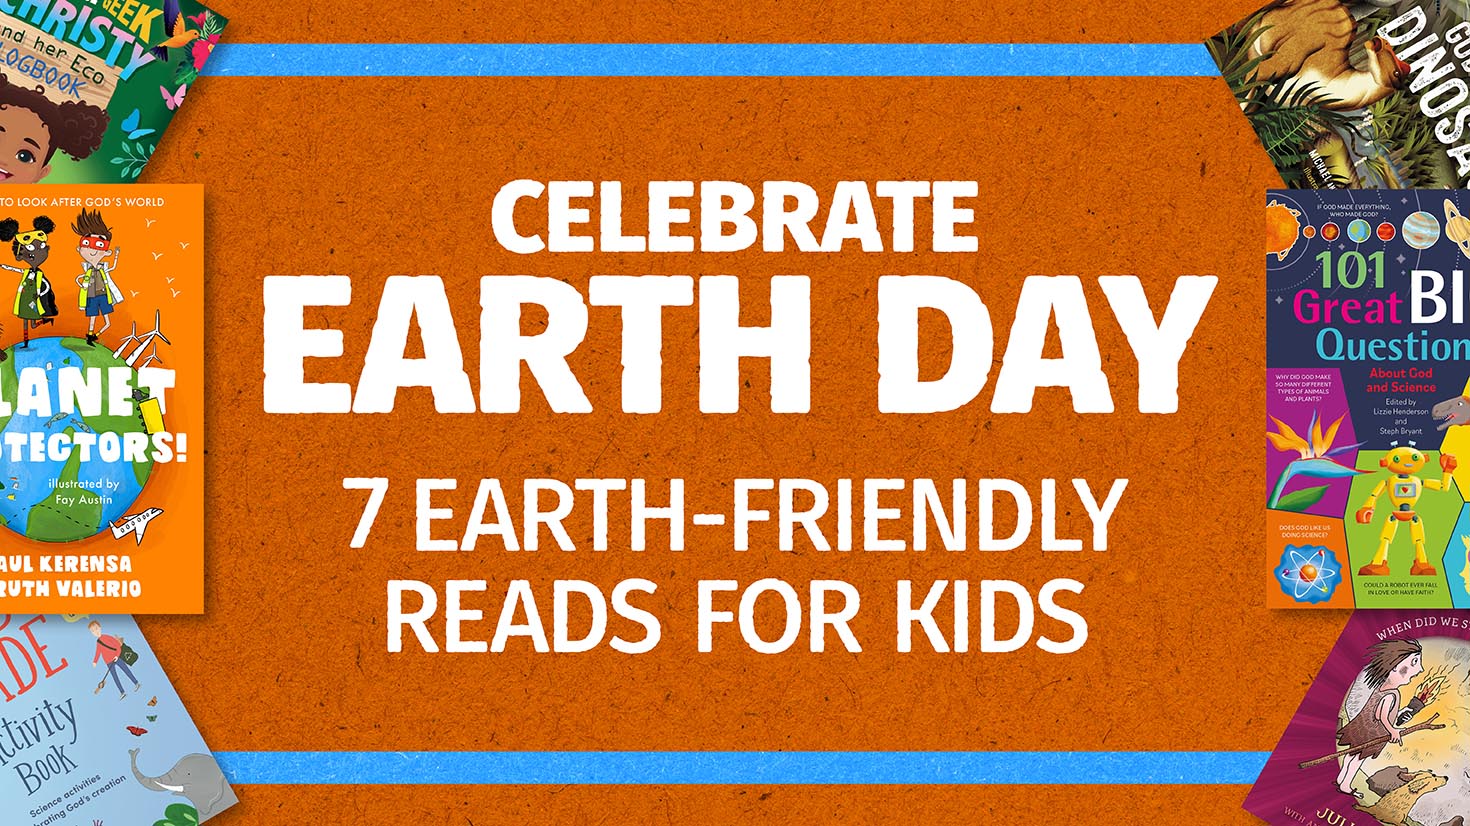 Celebrate Earth Day With 7 Earth-Friendly Reads For Kids